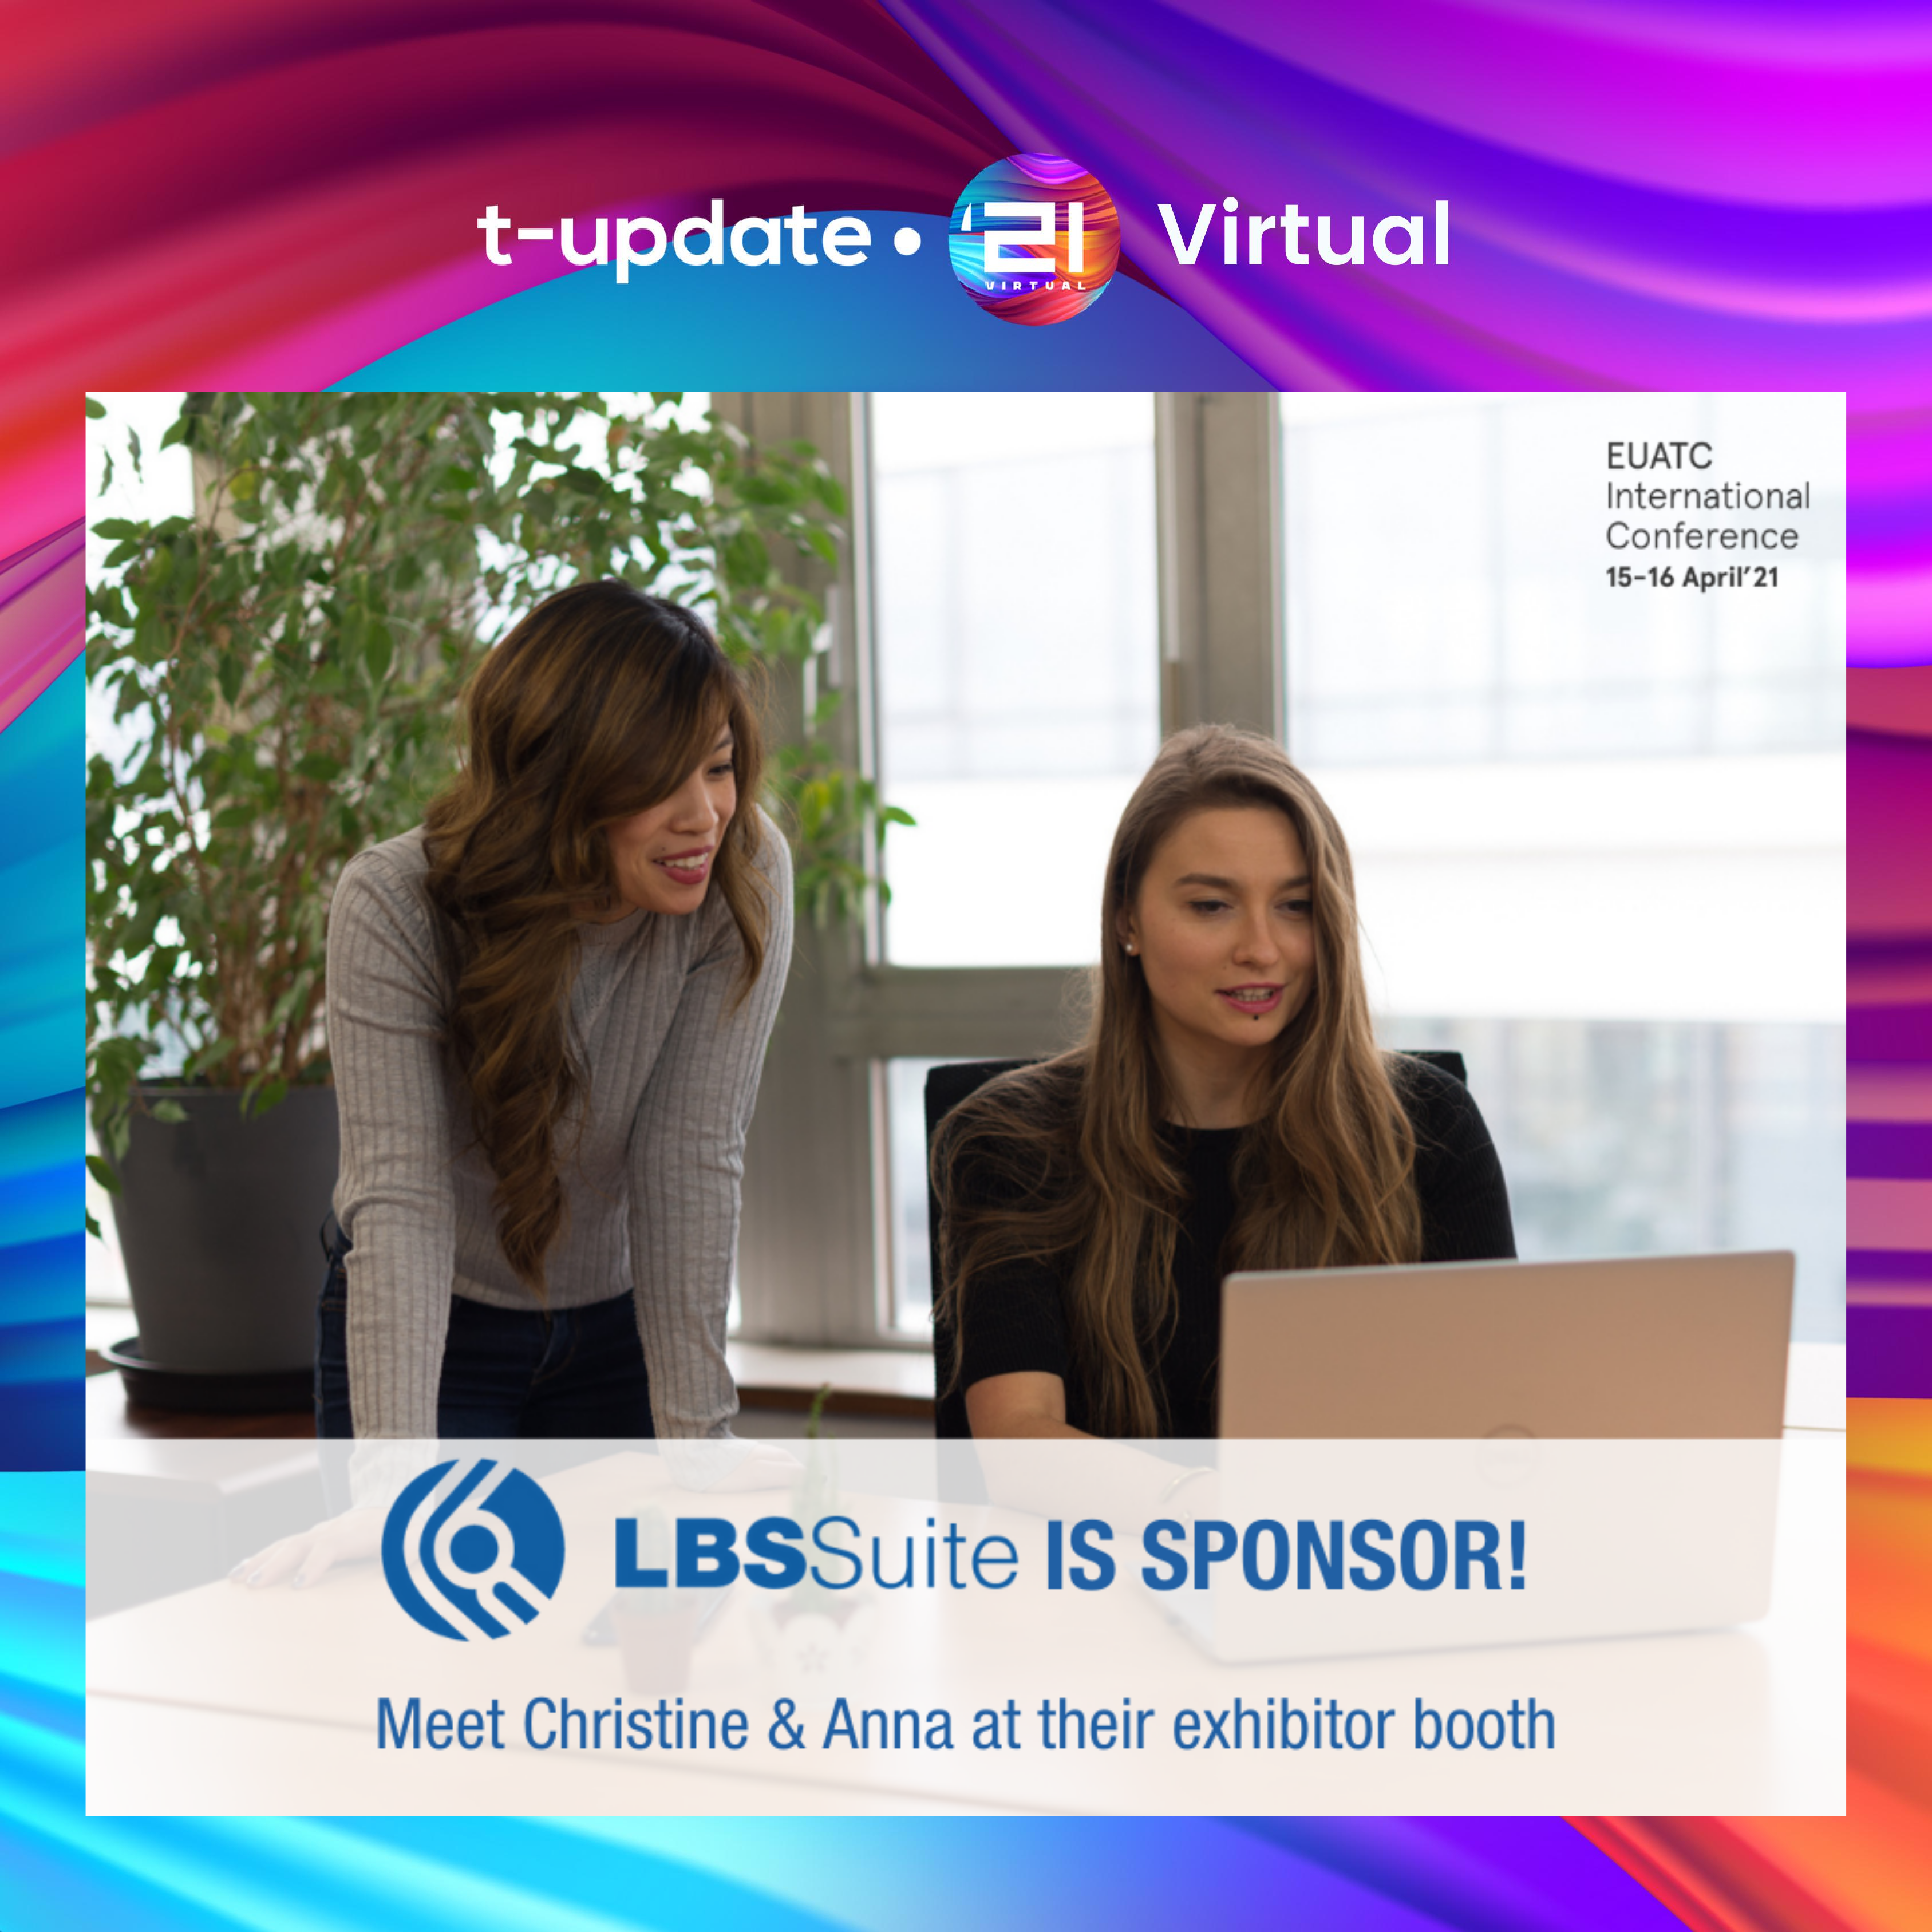 LBS Suite at EUATC T-Update 3D World 2021